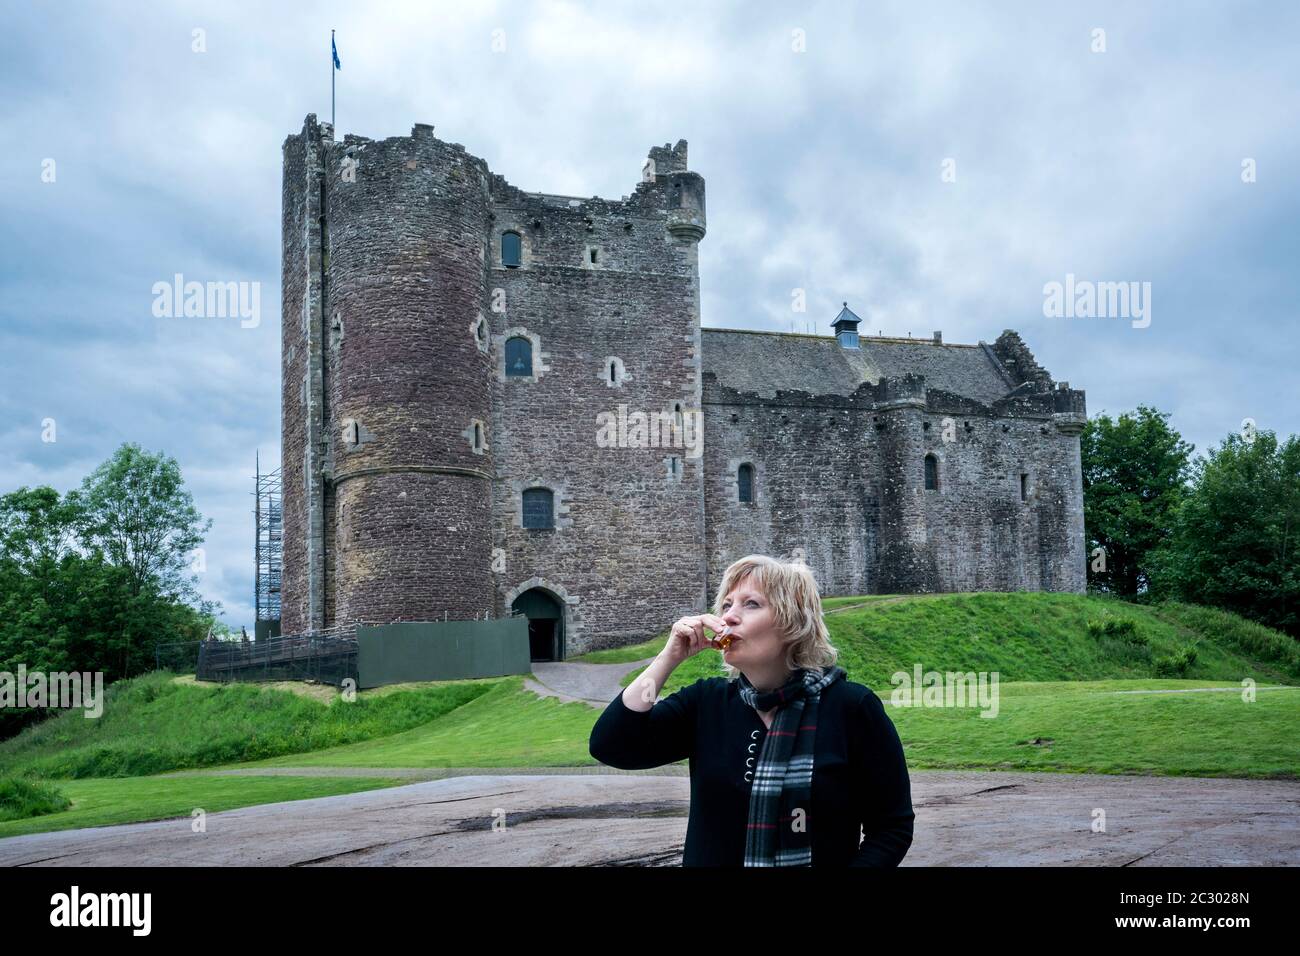 Blond tourist in her 50's drinks a dram of whisky outdoors in front of Doune castle, Stirling, Scotland, UK, Europe Stock Photo